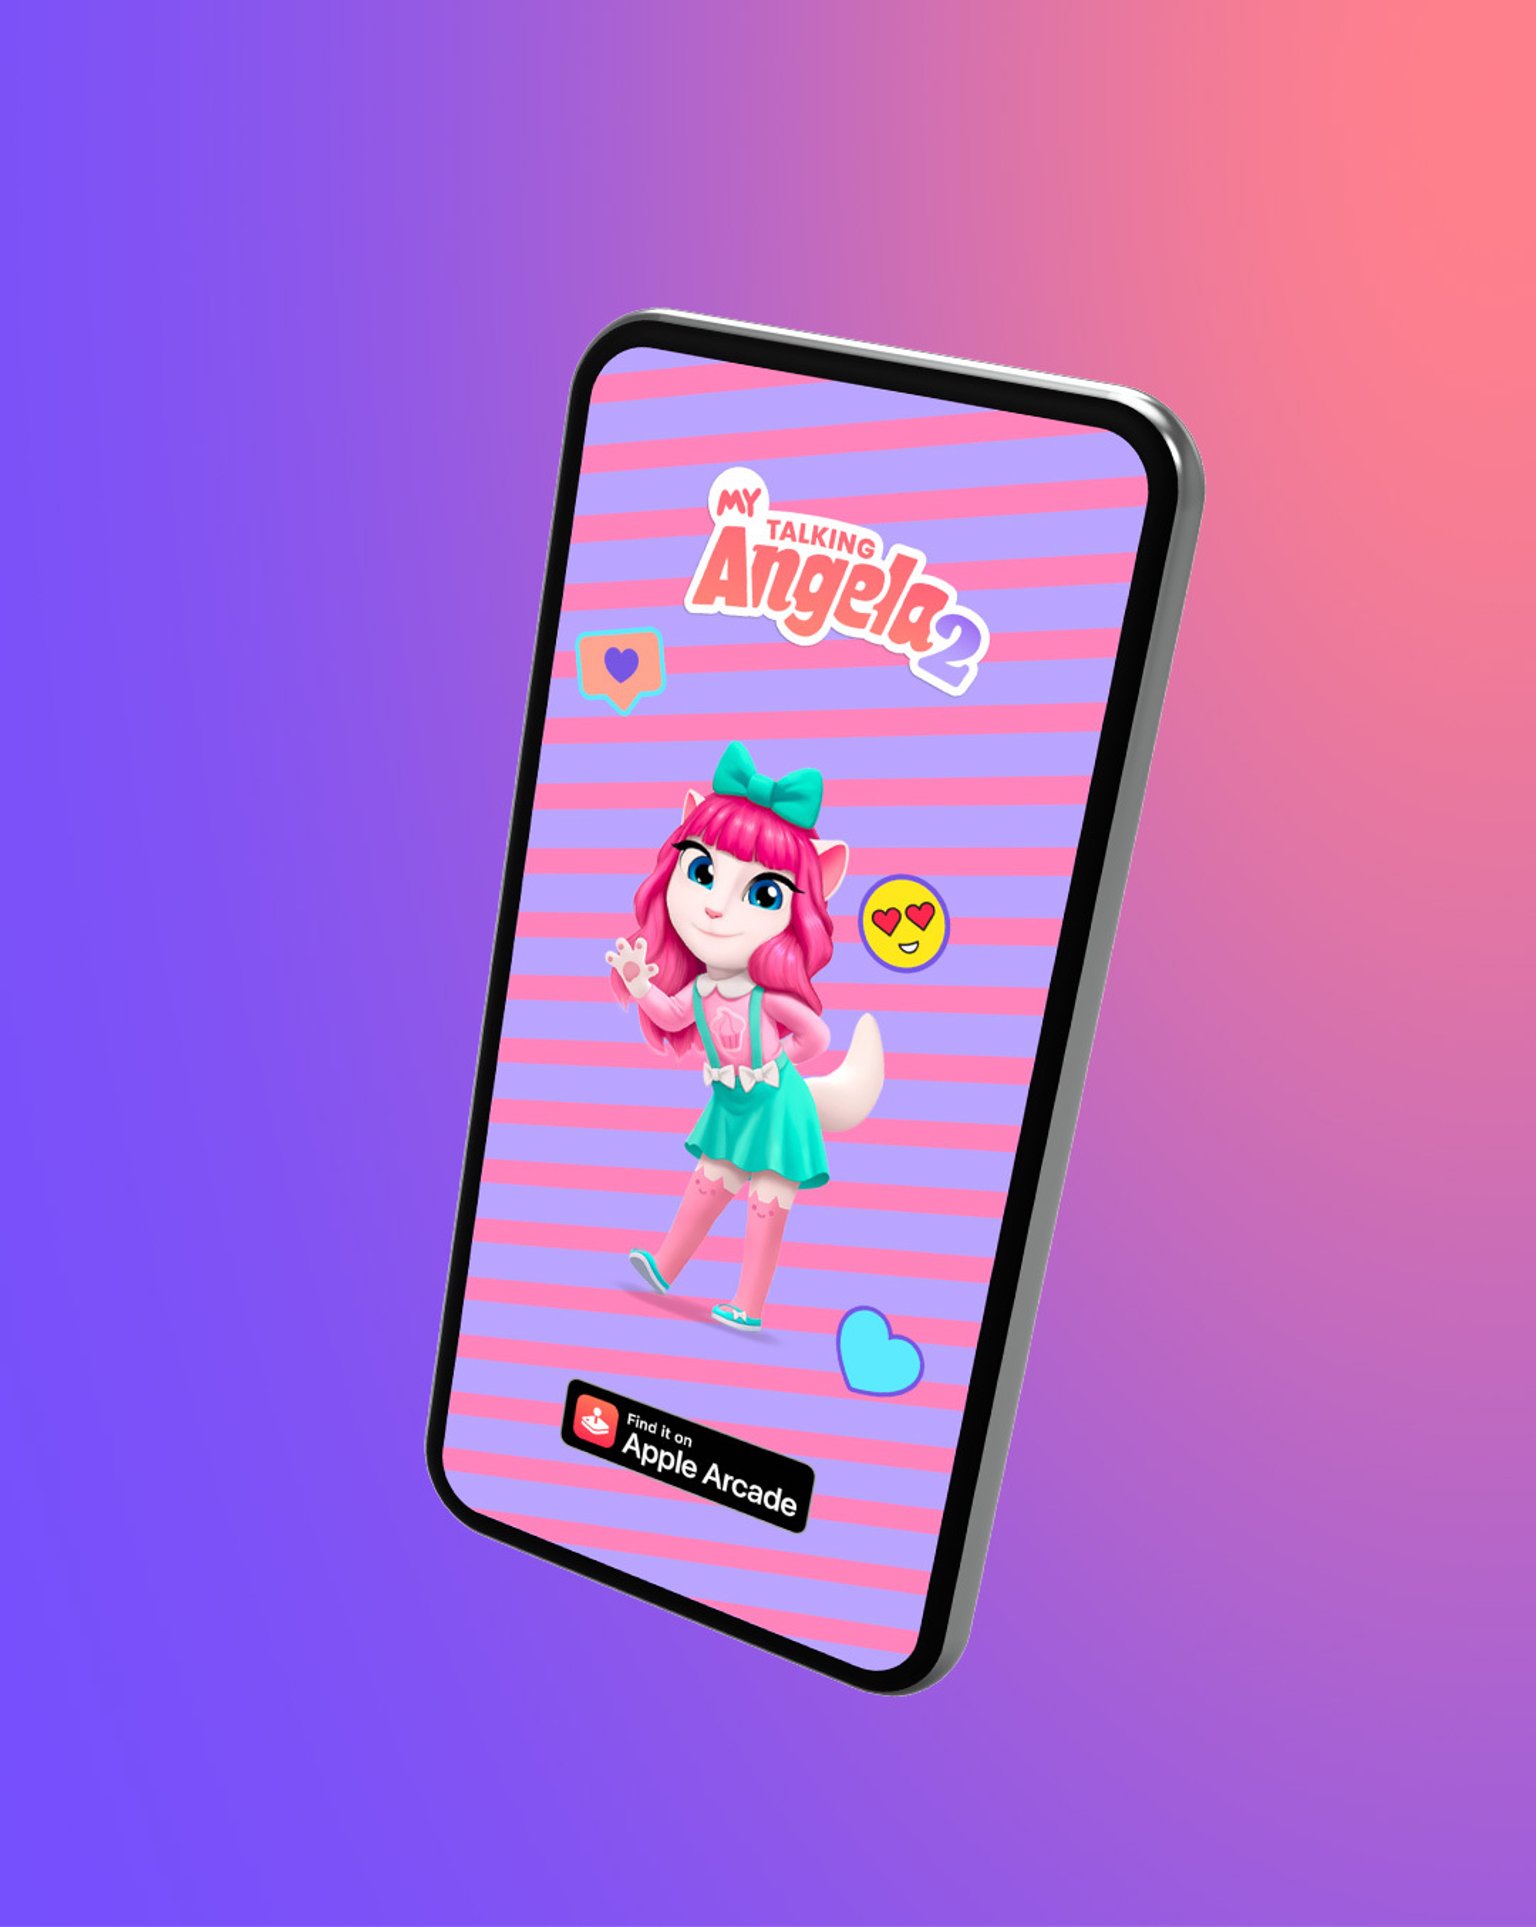 My Talking Angela 2: Now Available on Apple Arcade